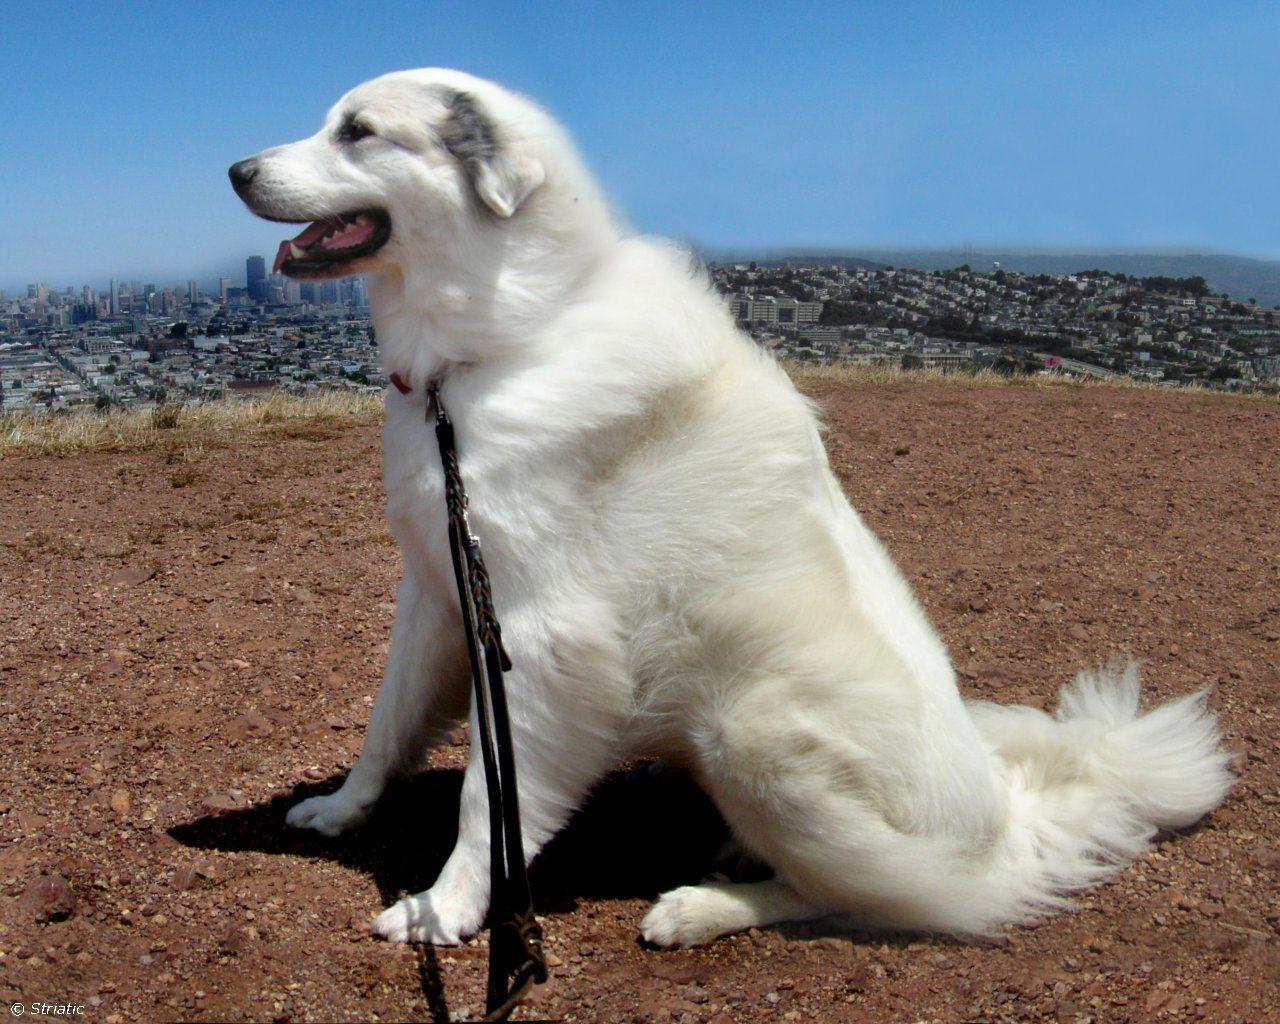 Great Pyrenees Dog pHOTO. Great Pyrenees Wallpaper, Picture